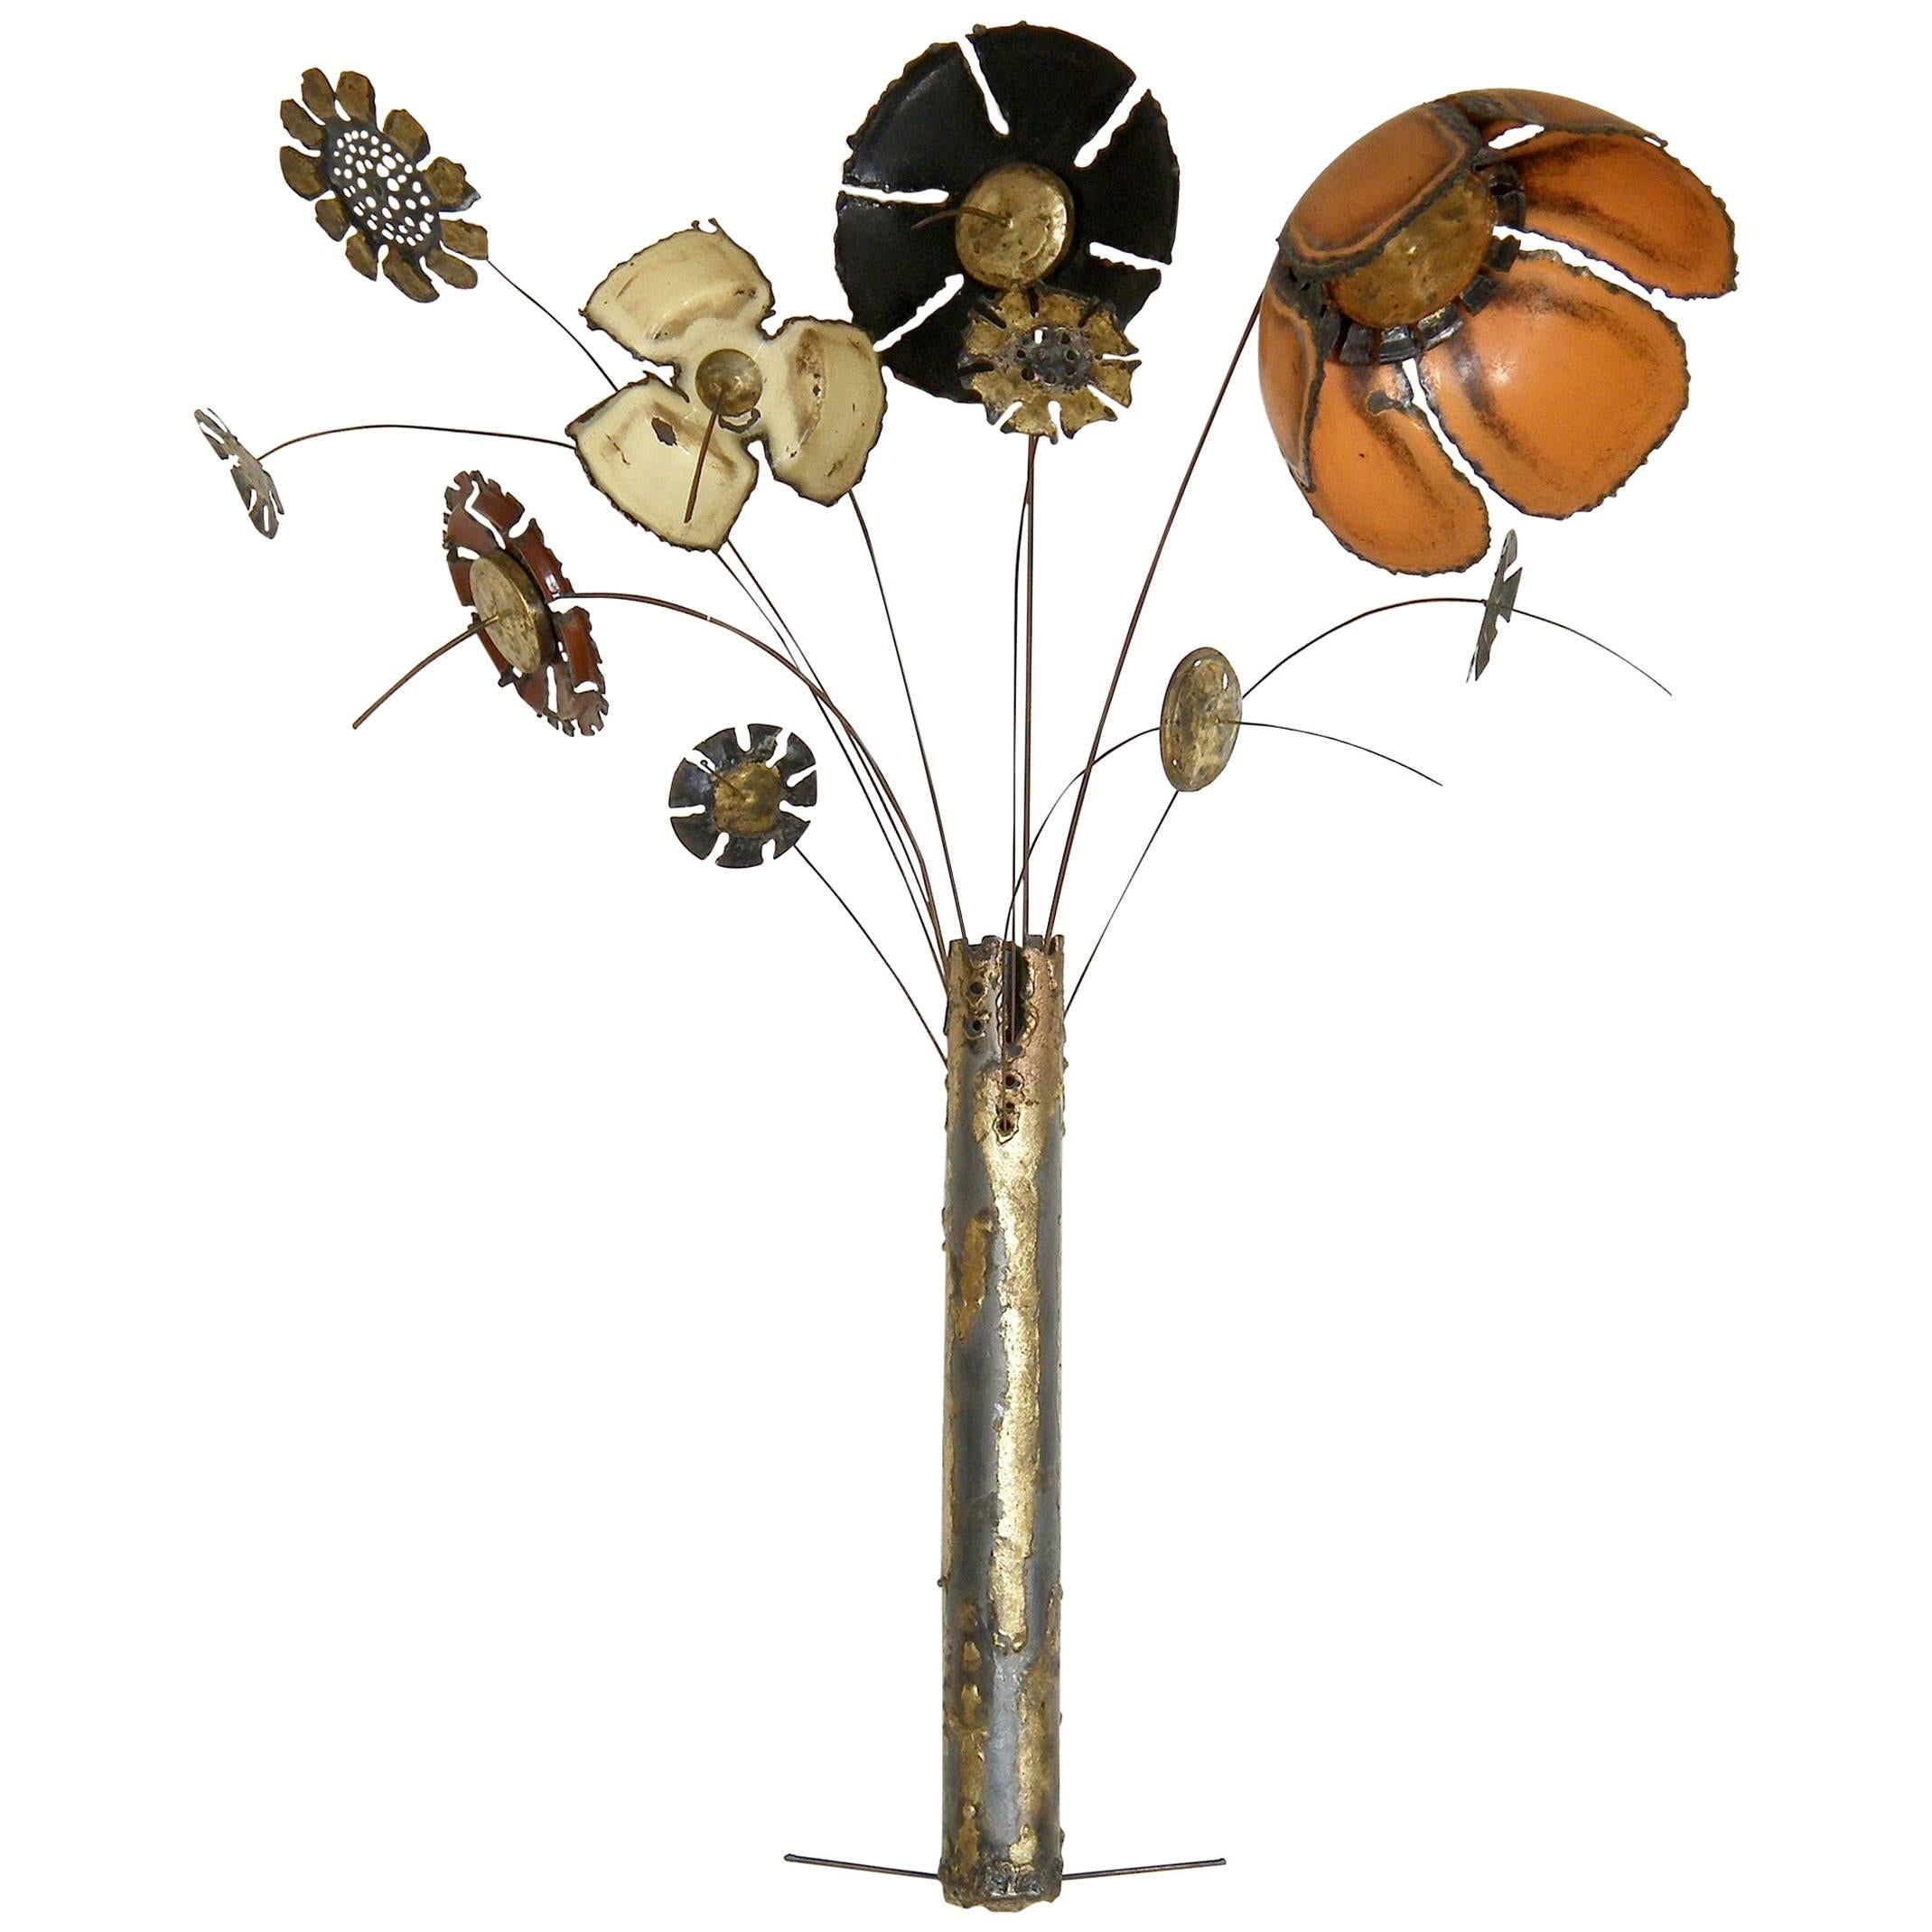 Large Scale Wall Sculpture of Enameled Flowers in a Brutalist Vase